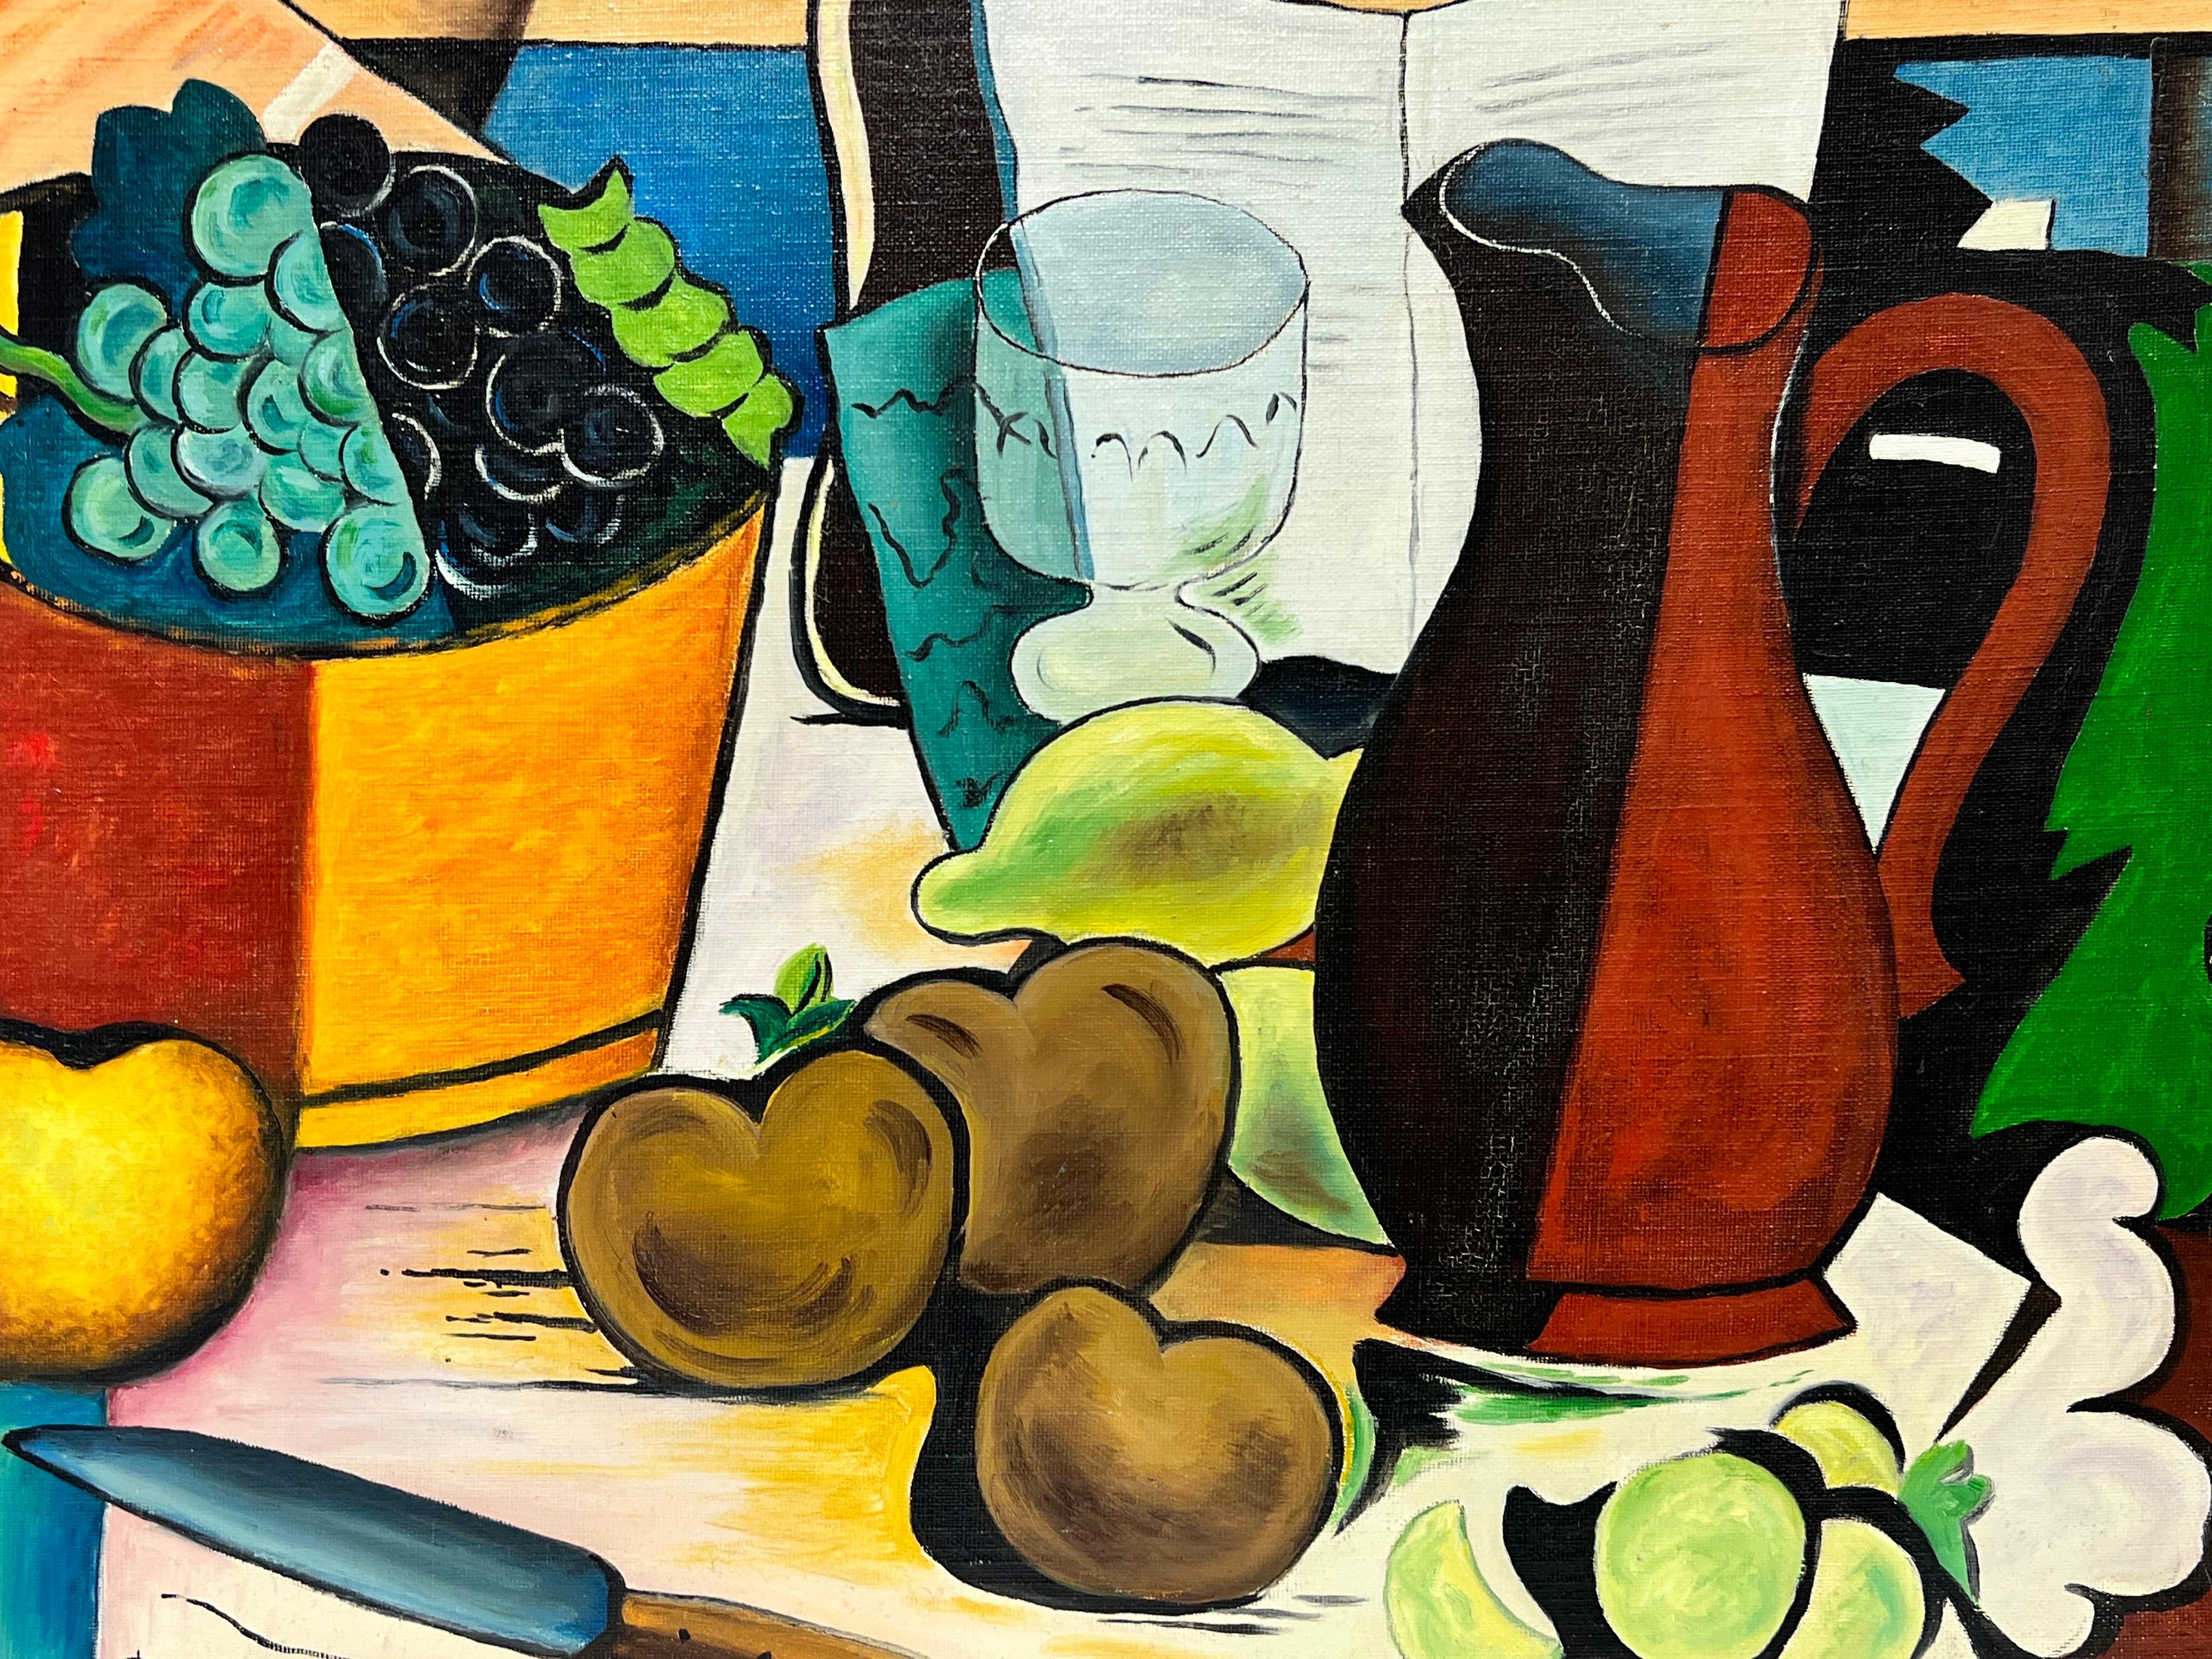 Artist/ School: Robert Roujas (French, 1908 - 2000), signed

Title: Still Life with Apples painted in the Cubist style. 

Medium: oil on board, unframed

Painting: 18 x 21.5 inches

Provenance: private collection, France

Condition: The painting is